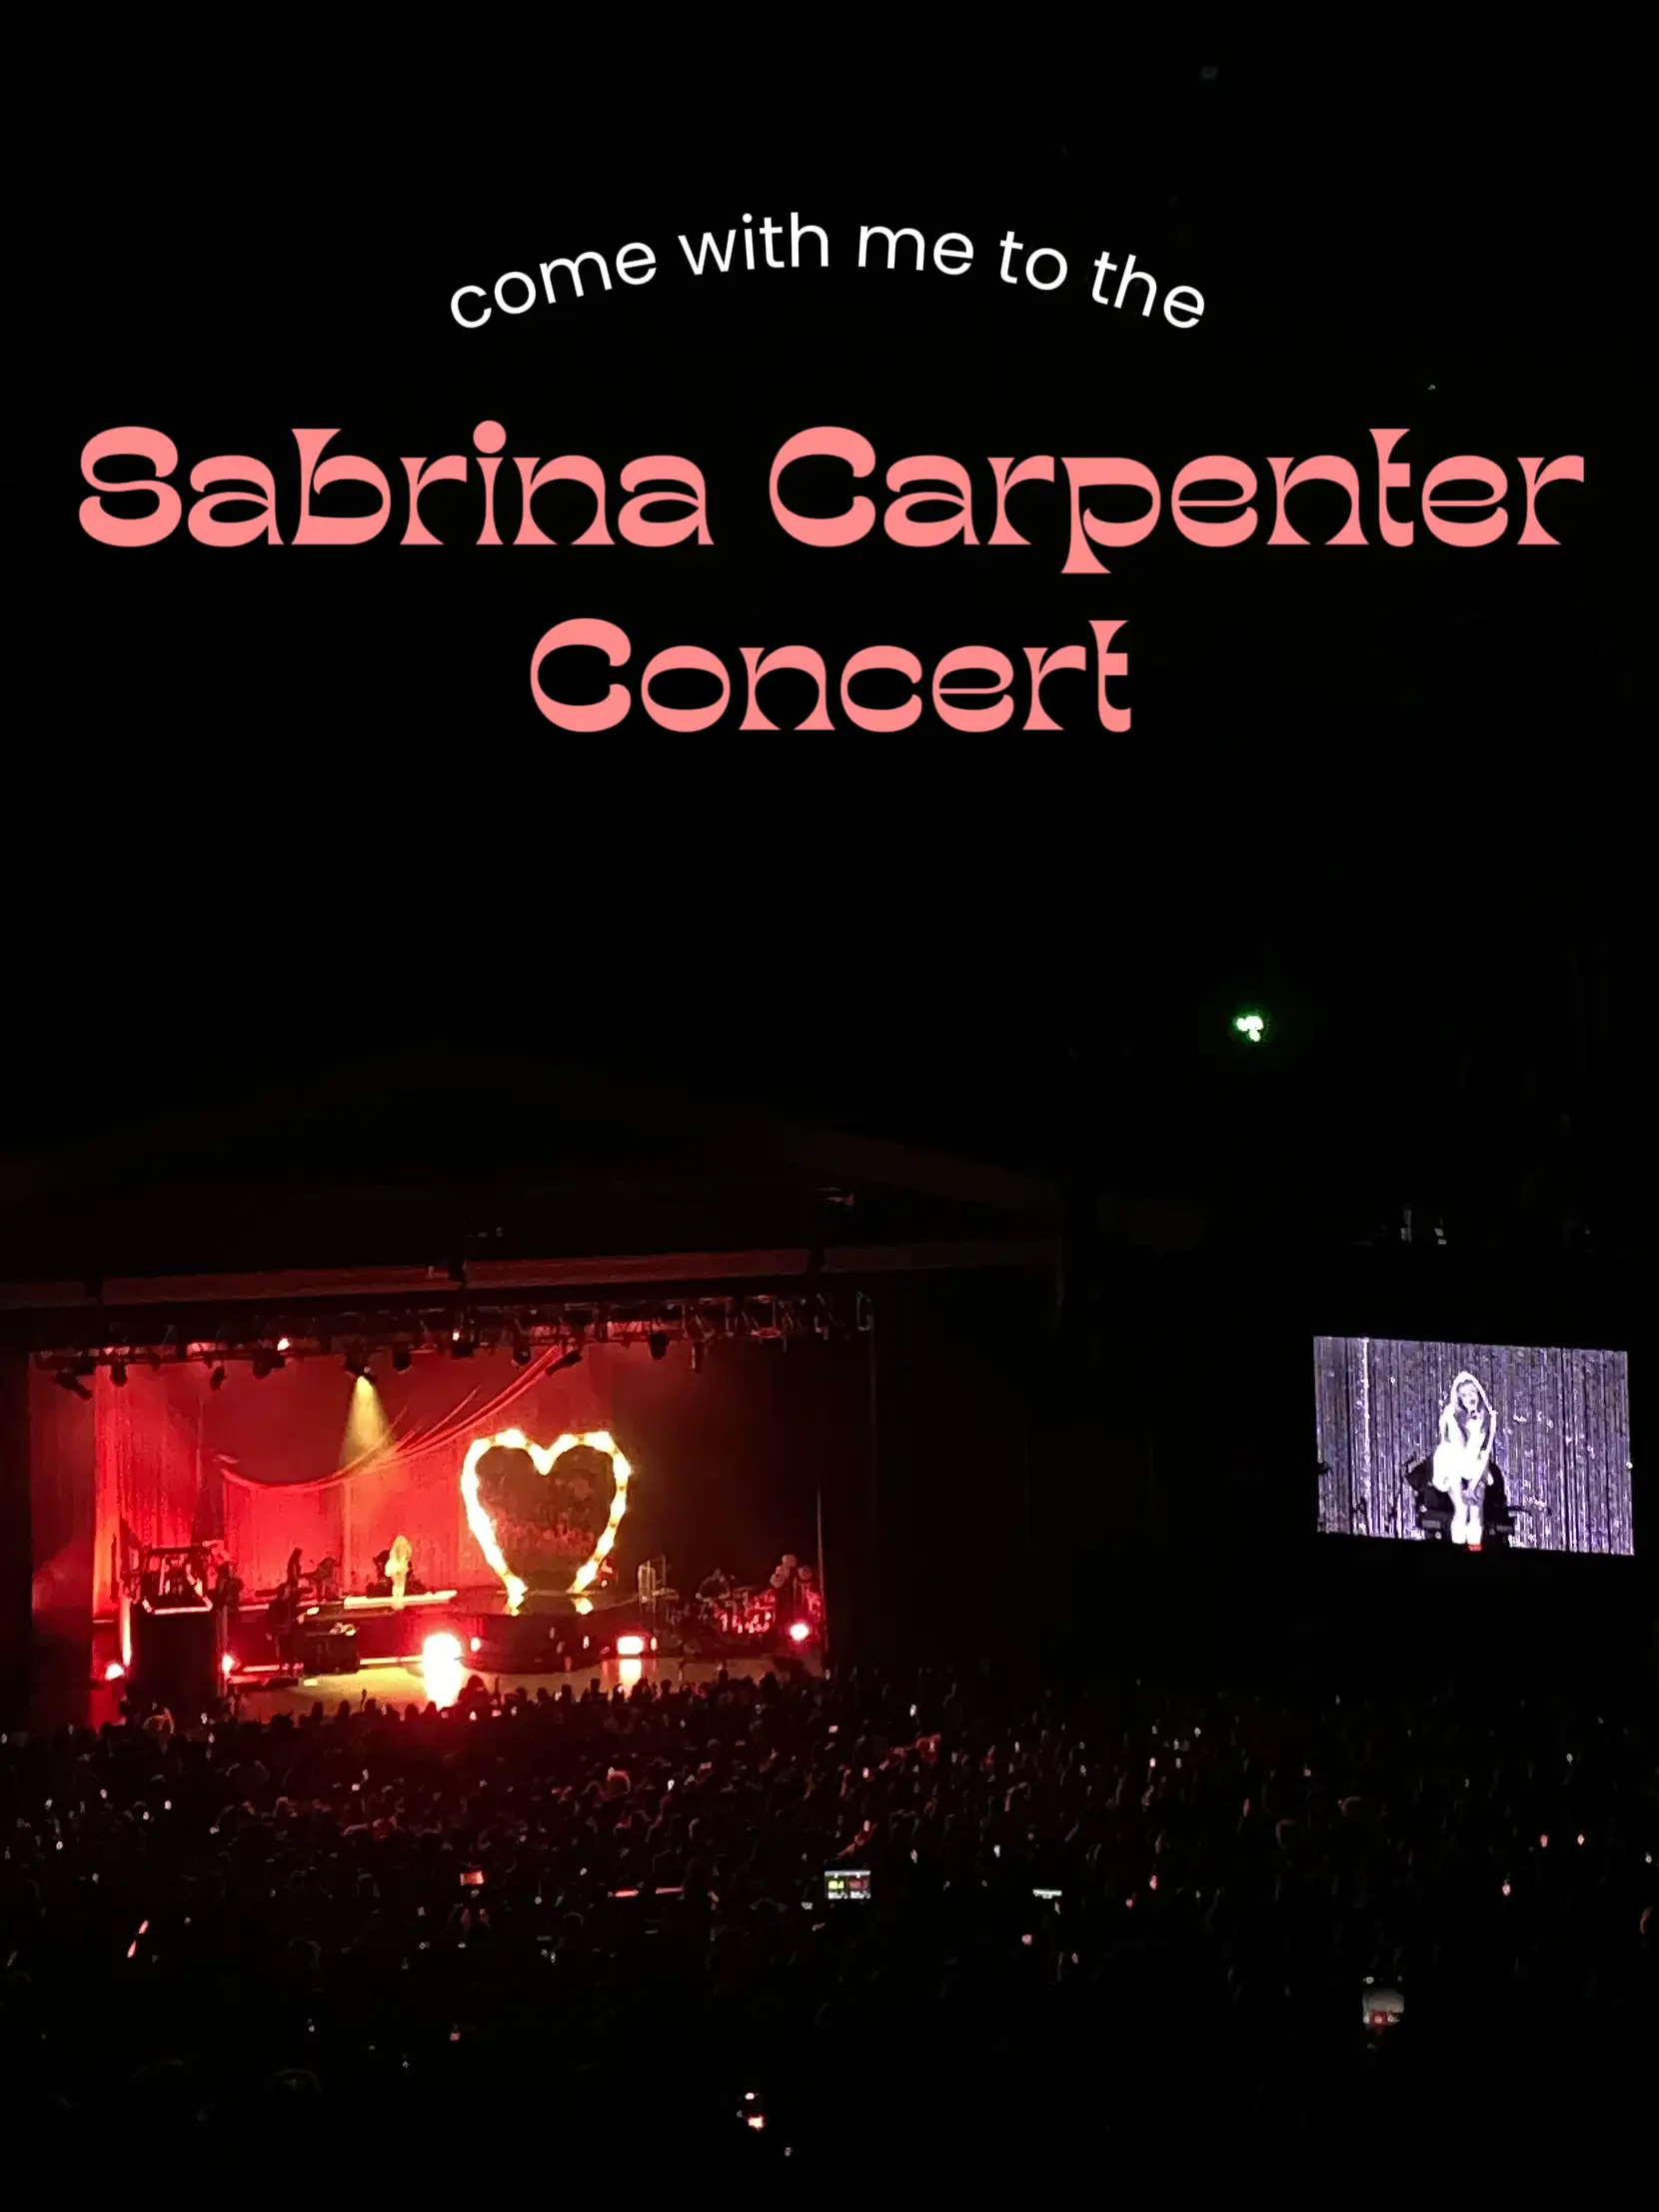 Come With Me to the Sabrina Carpenter Concert!'s images